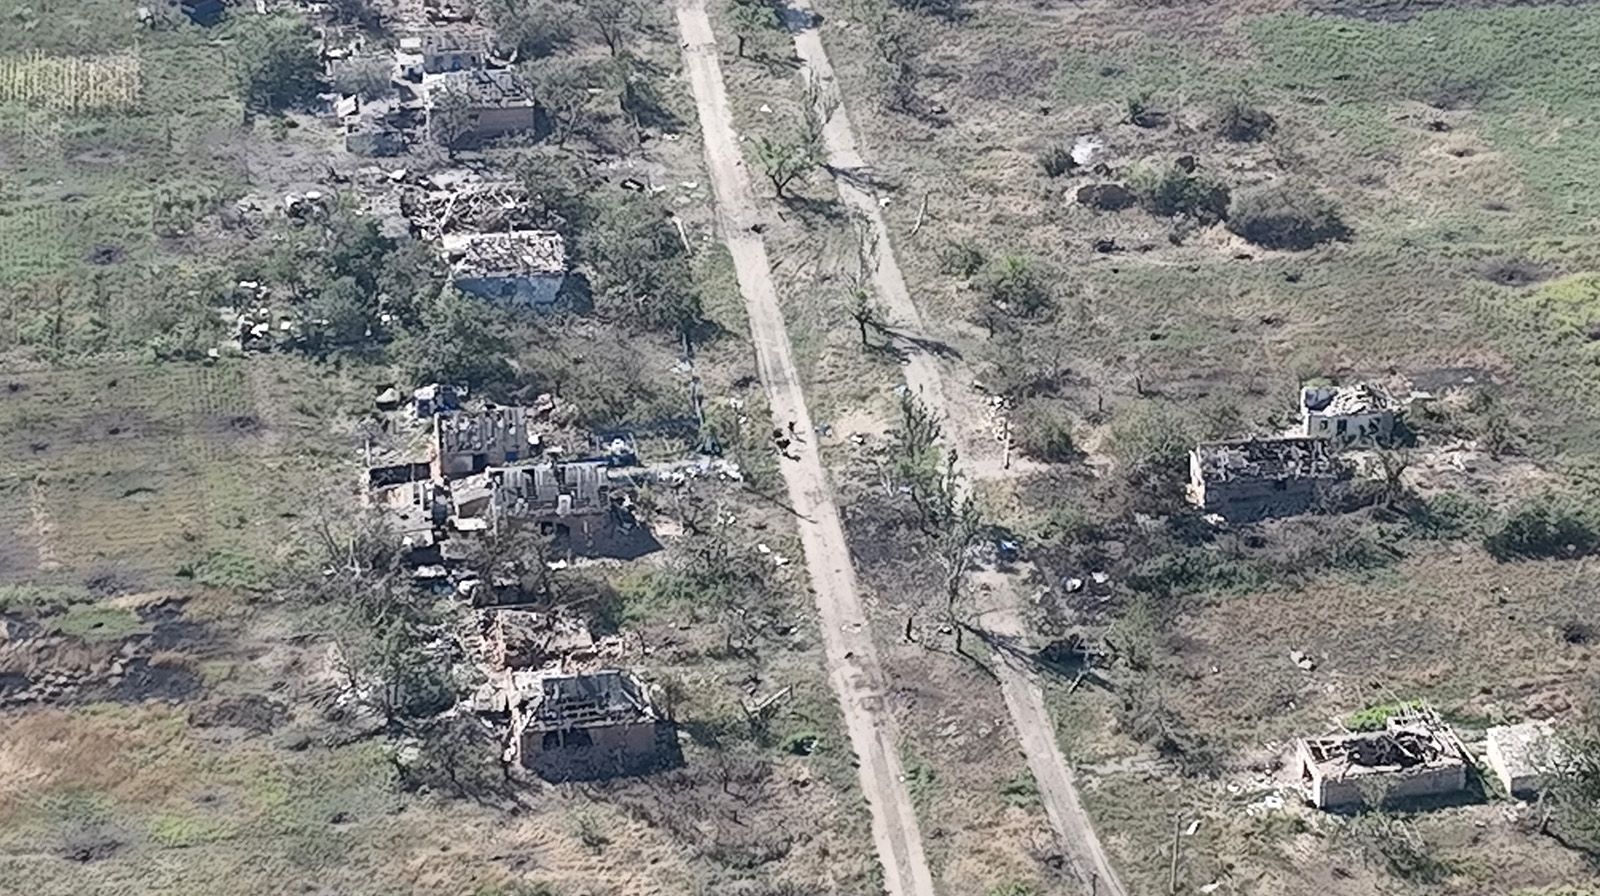 Ukrainian soldiers enter the embattled village of Robotyne, Zaporizhzhia region, Ukraine, in this screengrab taken from a handout video released on August 25.